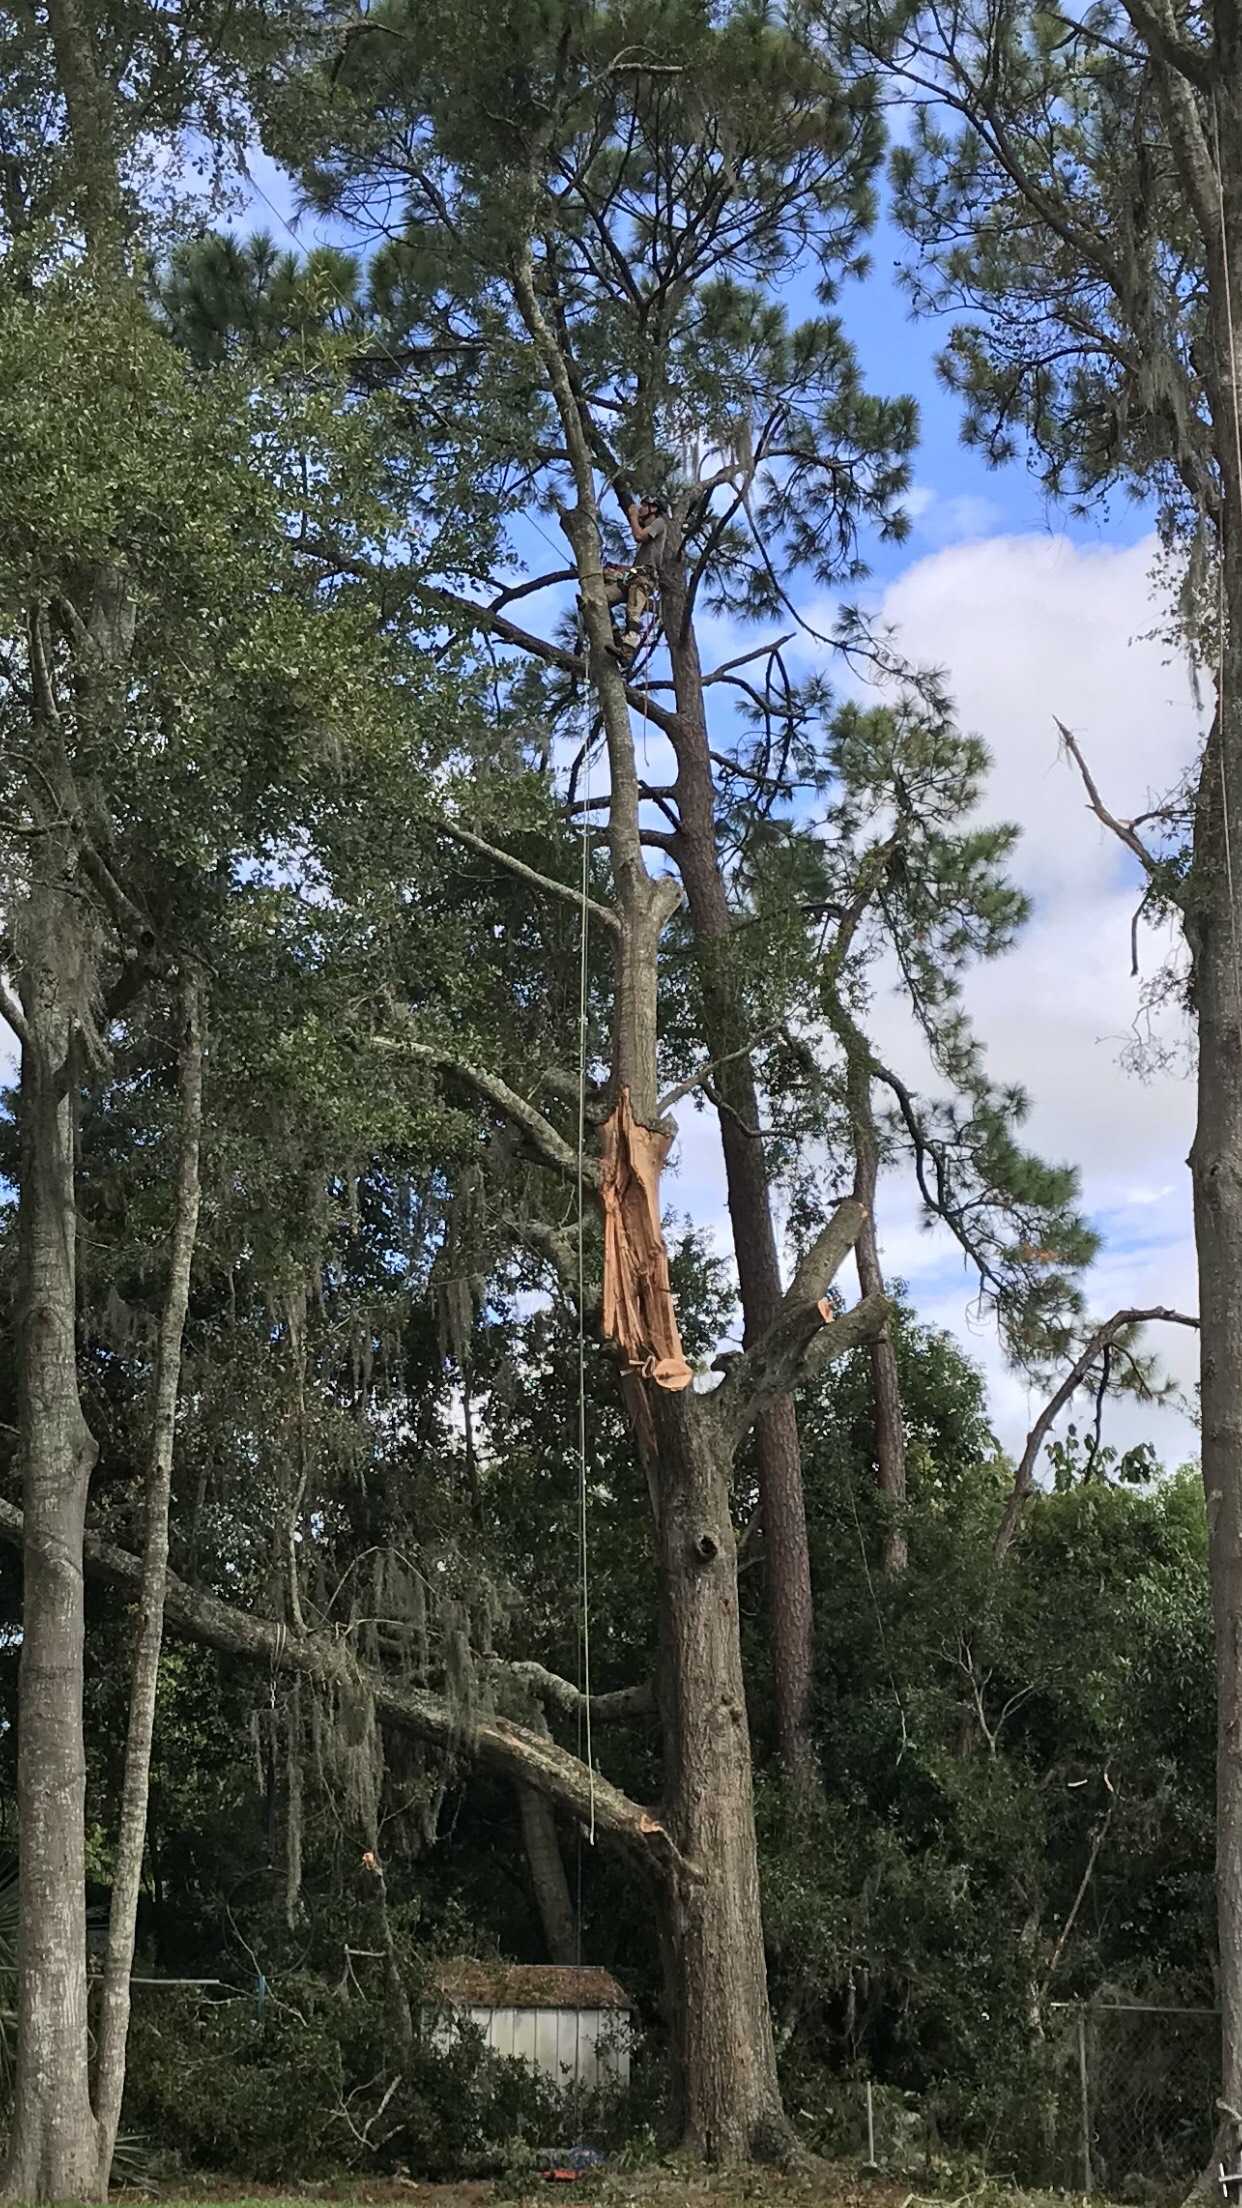 An arborist working on a tree with a large section torn off the center.